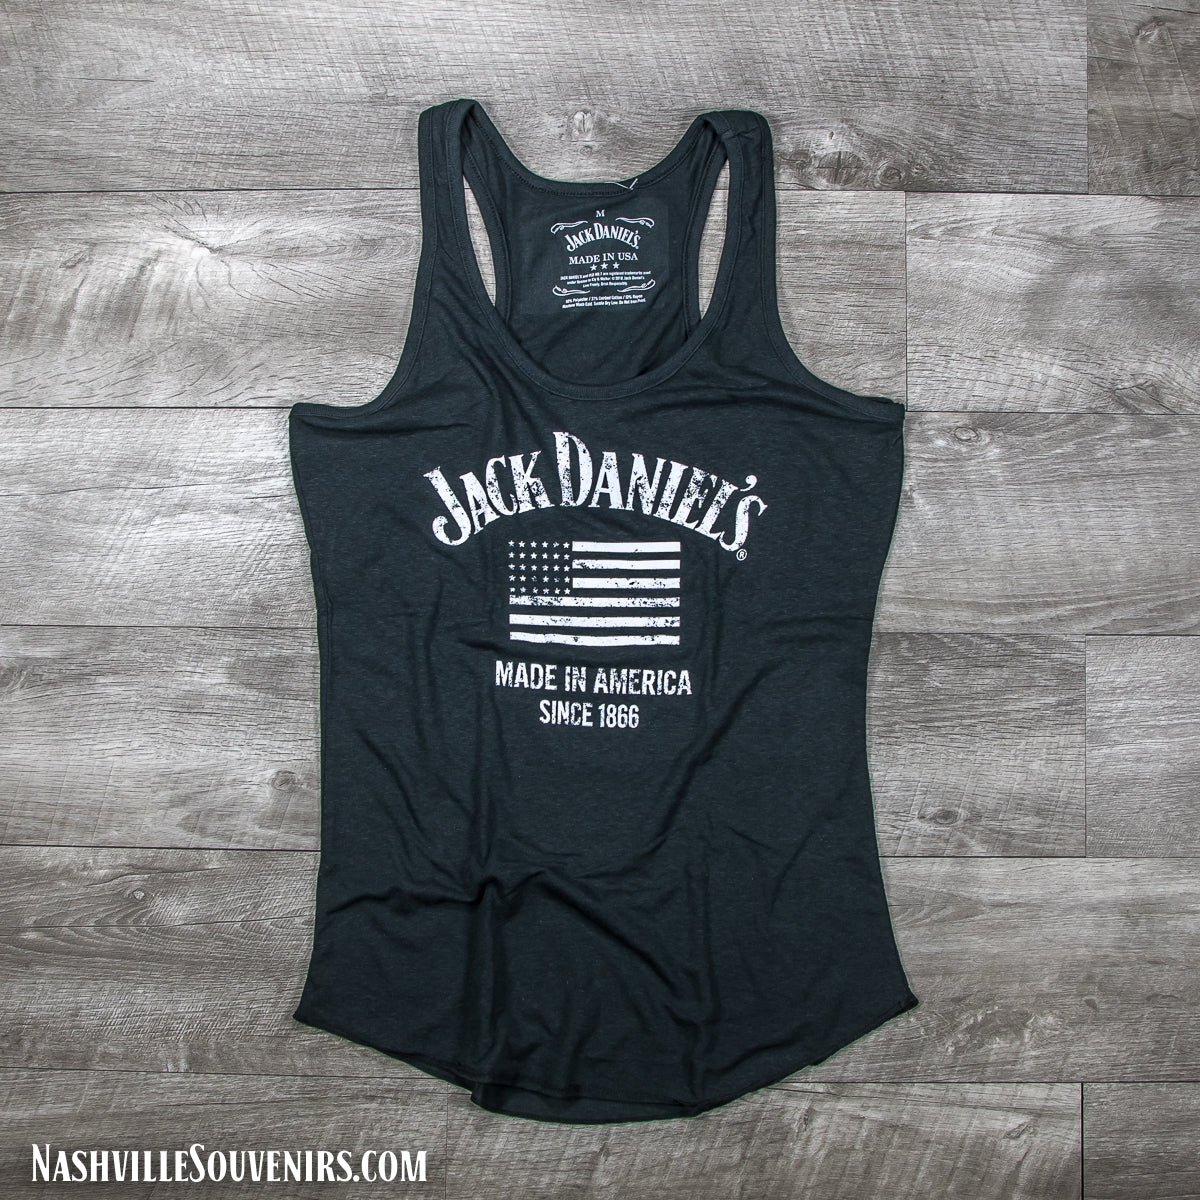 Officially licensed ladies Jack Daniels Made in America Flag Tank Top featuring a white American flag on a black tank top. Get yours today with FREE SHIPPING on all US orders over $75!